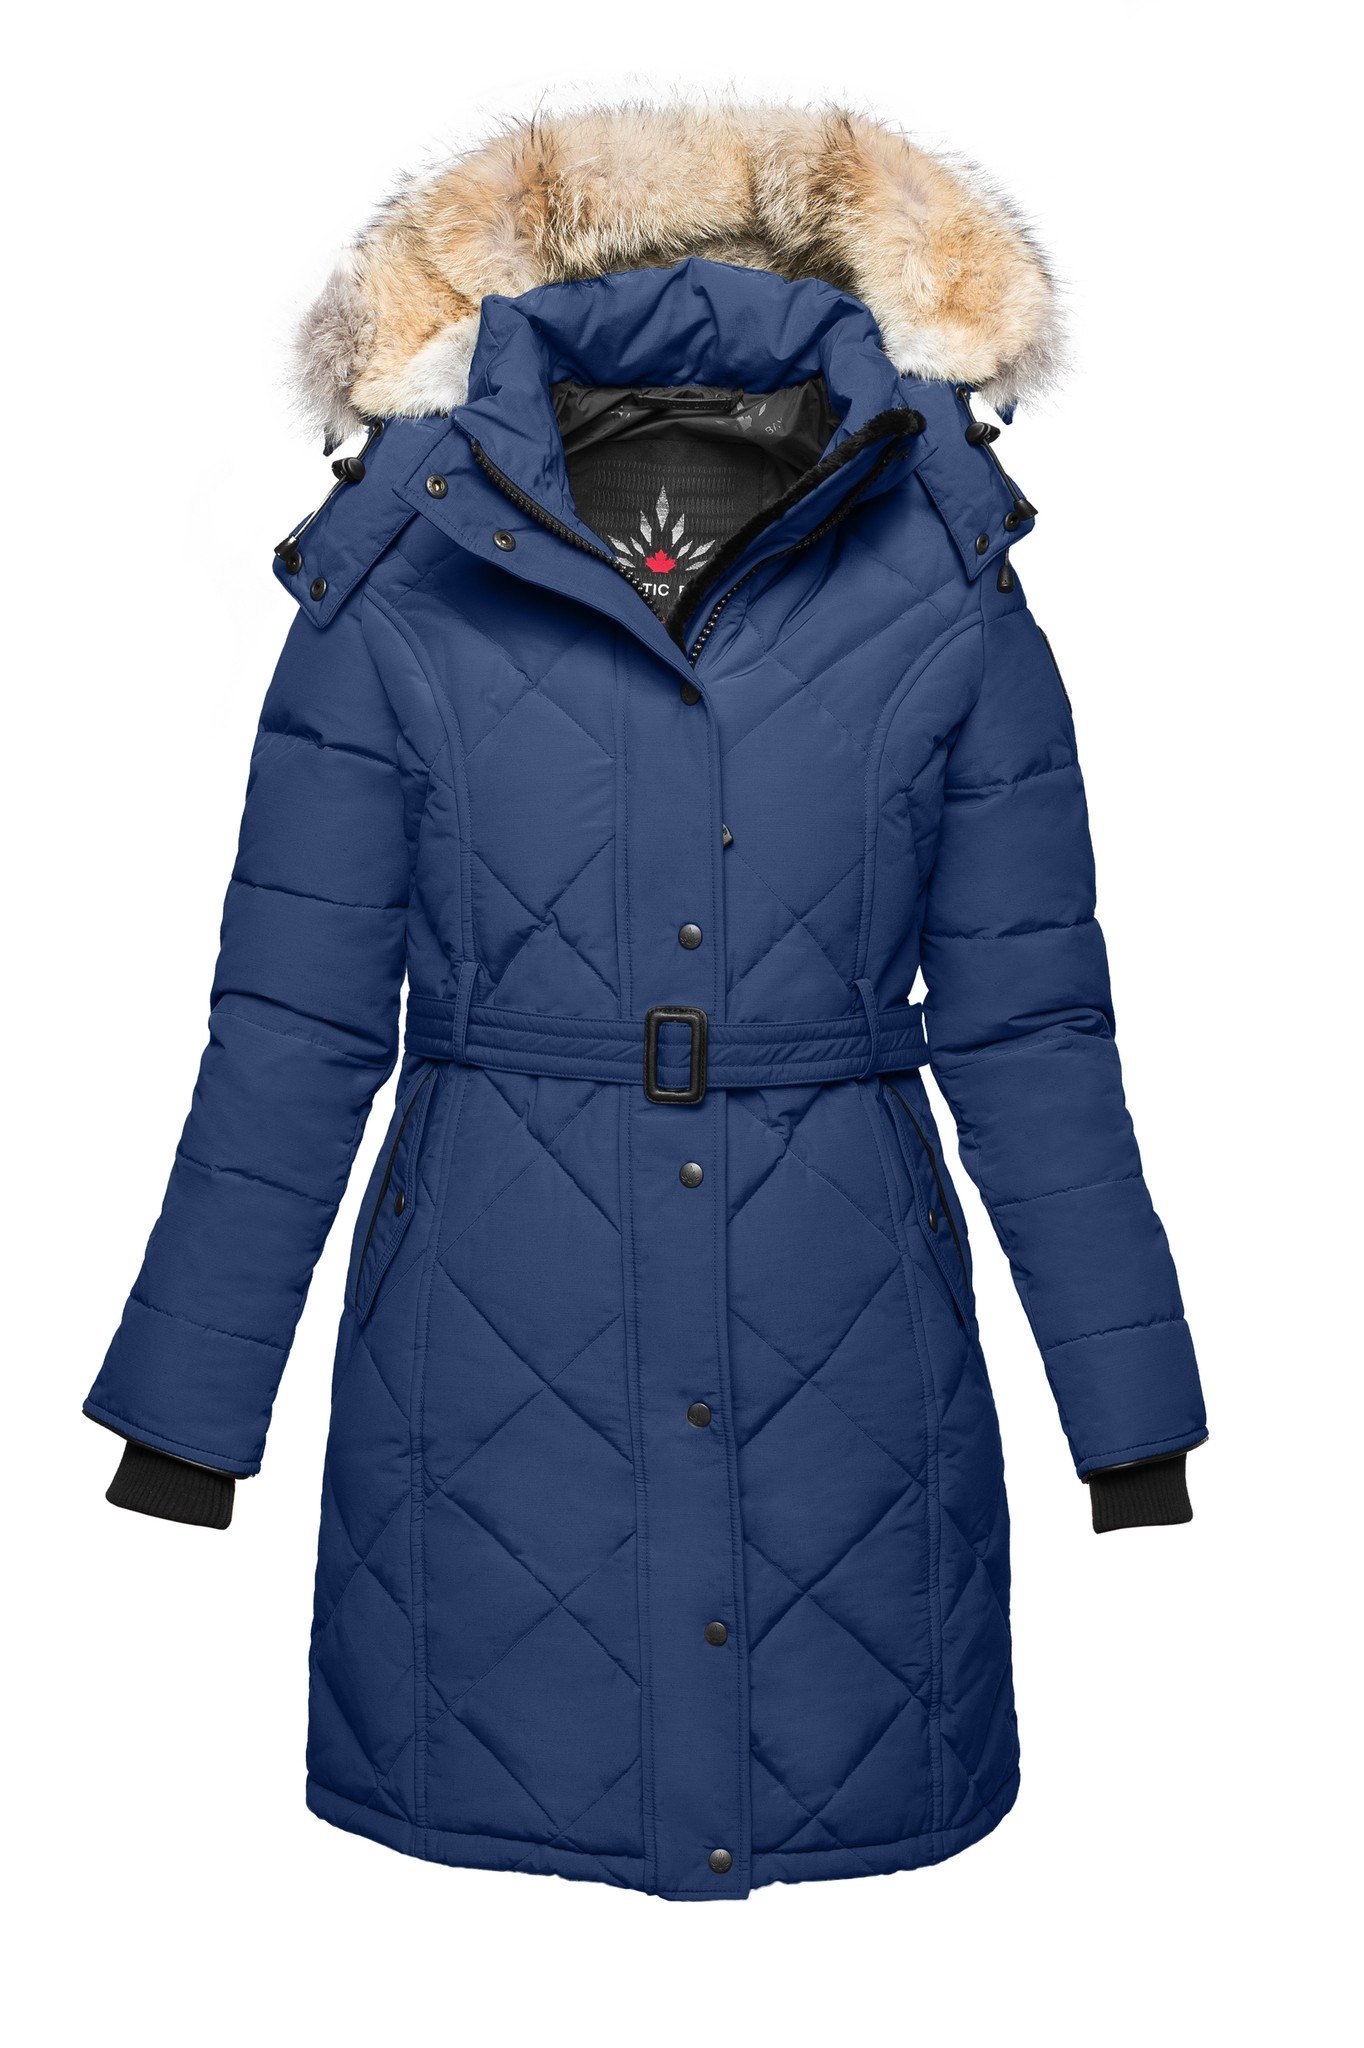 3 Types of the Best Winter Jackets